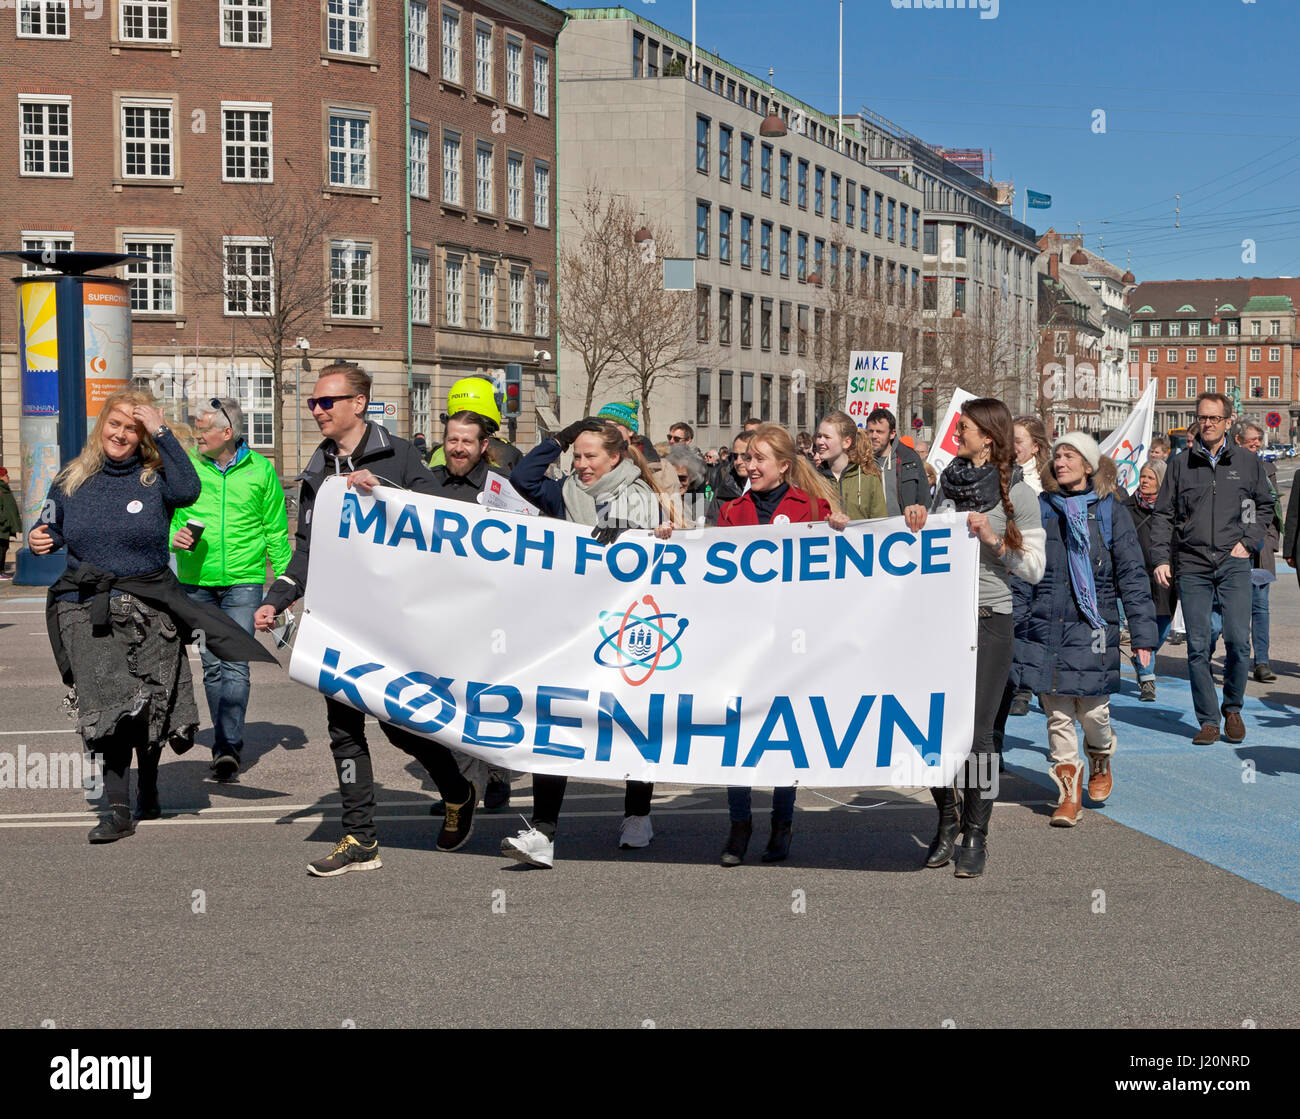 The March for Science in Copenhagen arrives at Christiansborg Castle Square after a two hours march through Copenhagen from the Niels Bohr Institute. Stock Photo